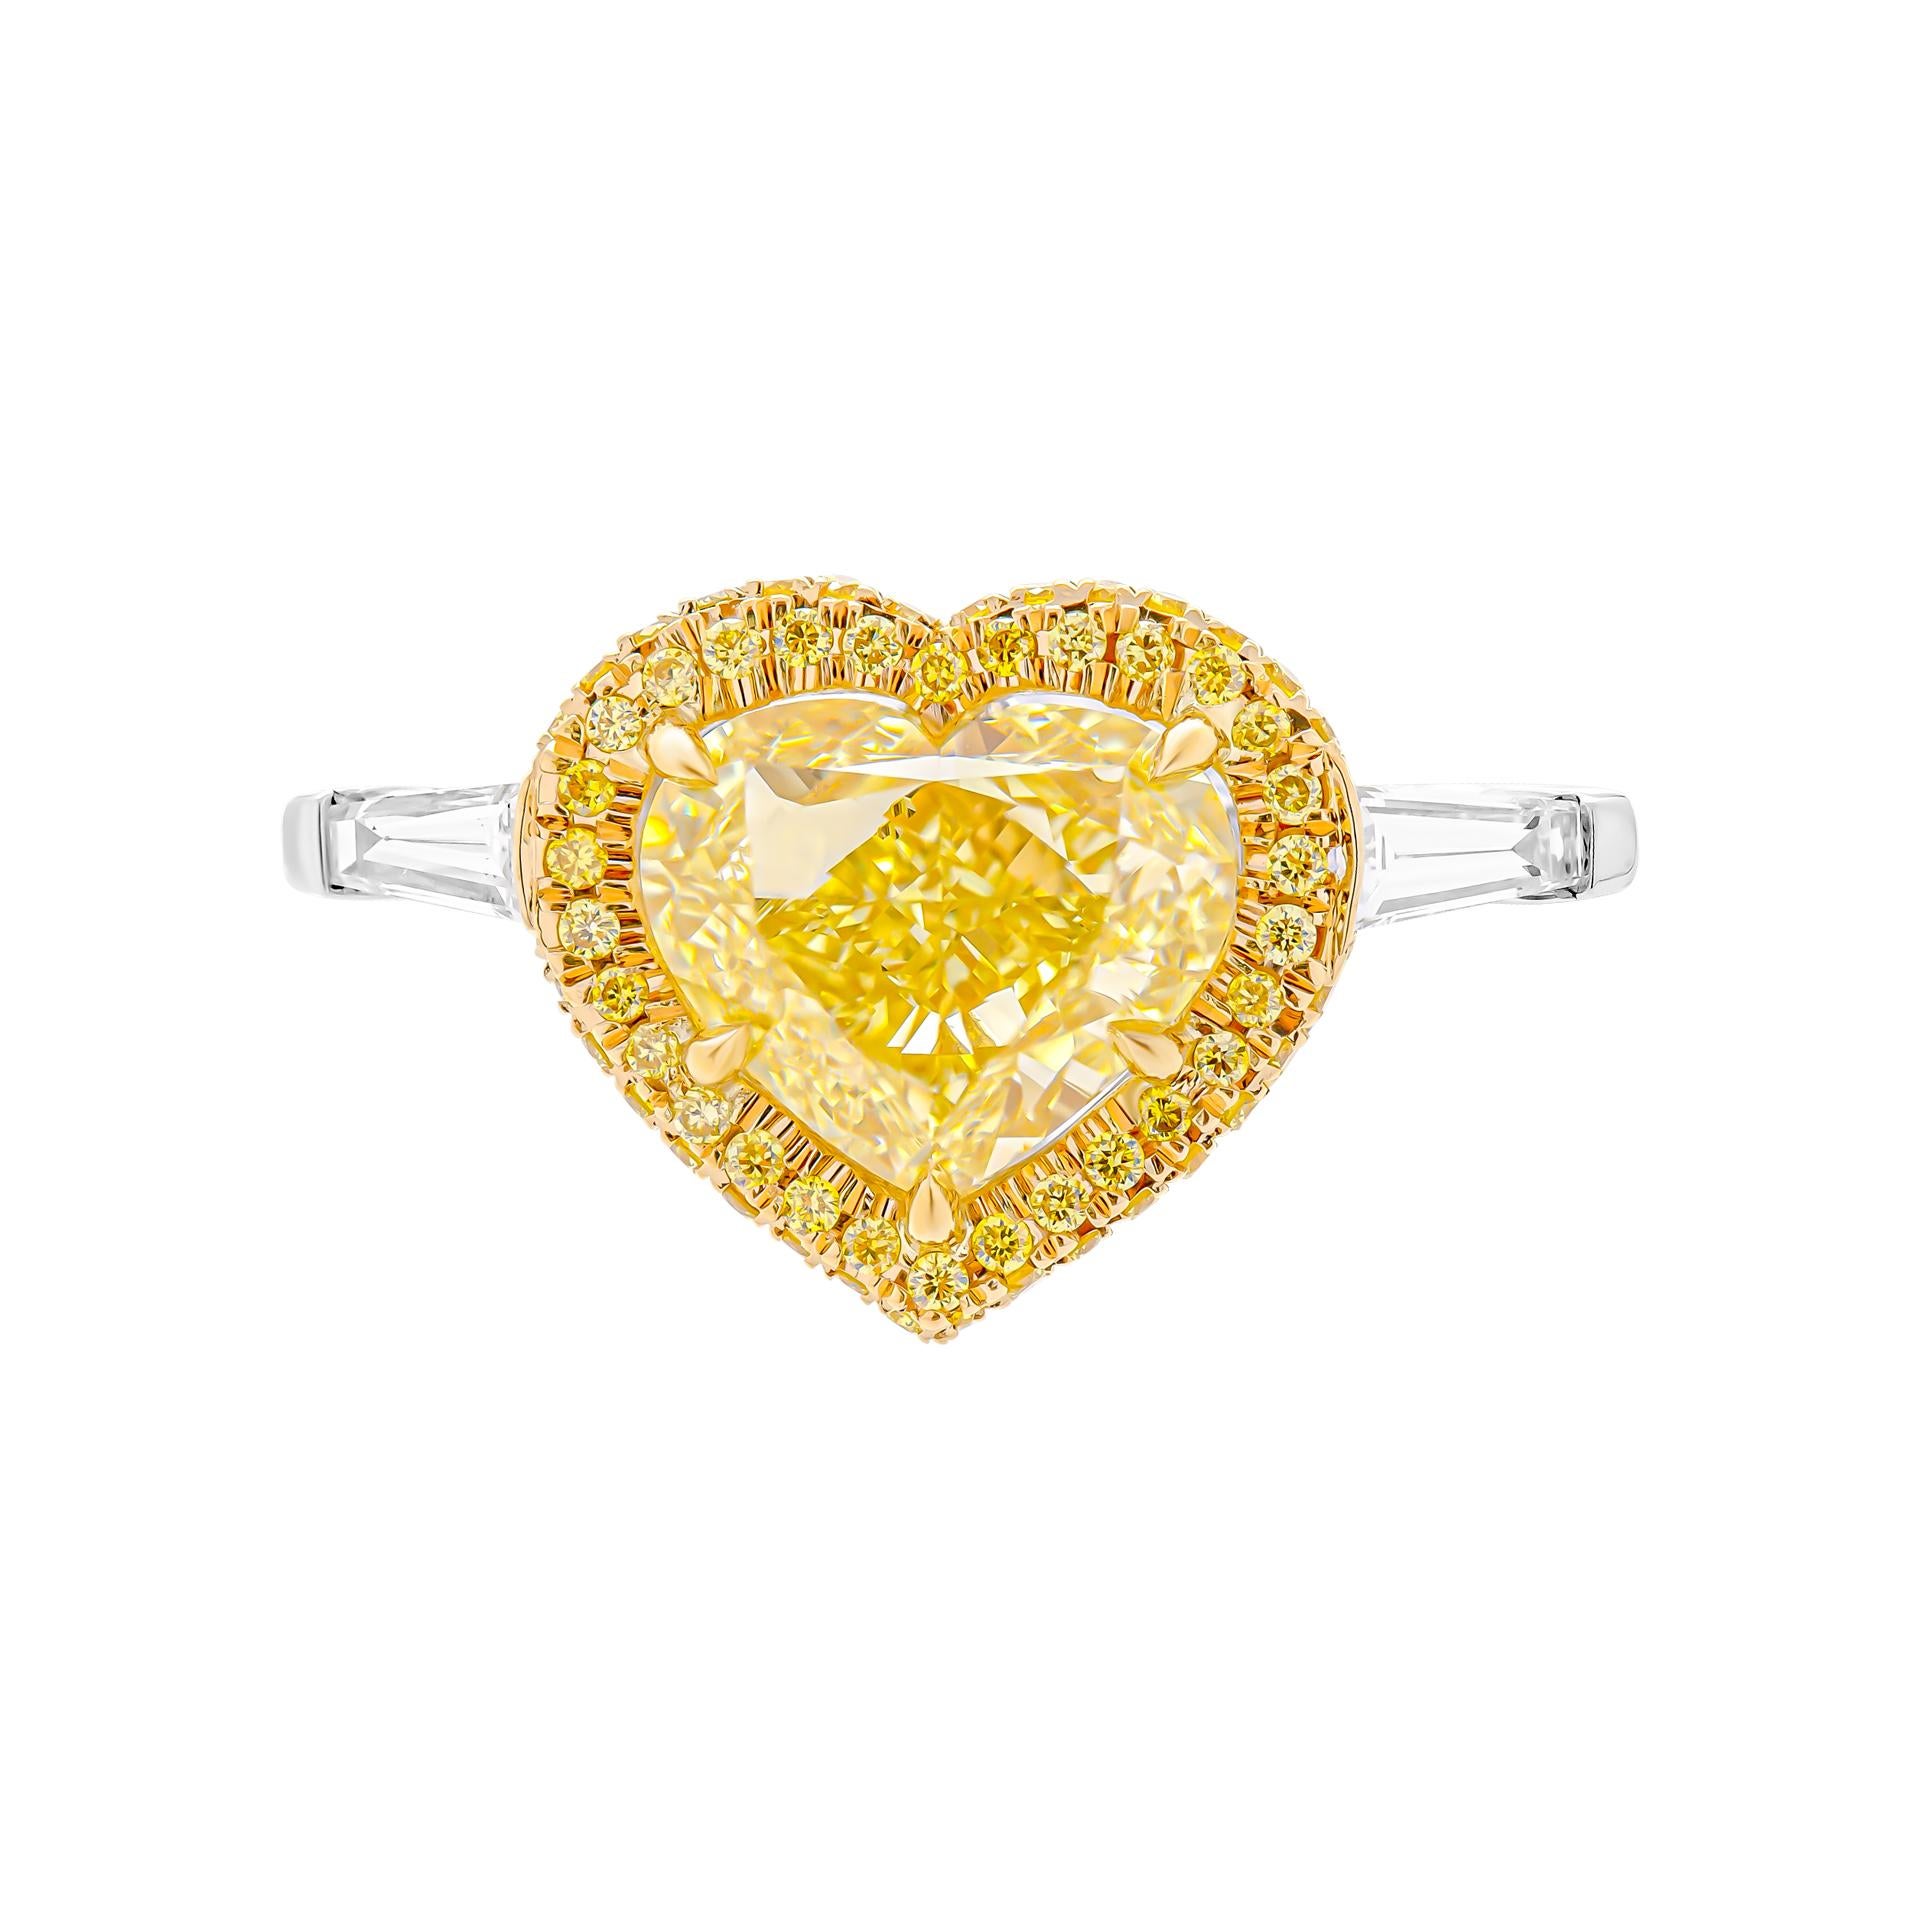 3 stone ring in Platinum & 18K Yellow Gold;
Center stone: 3.40ct Natural Fancy Yellow Even VS1 Heart Shape Diamond GIA#1437671258
Side stones: 0.31ct D VS tapered baguettes
Total Carat Weight pave Yellow: 0.26ct 
Total Carat Weight pave White: